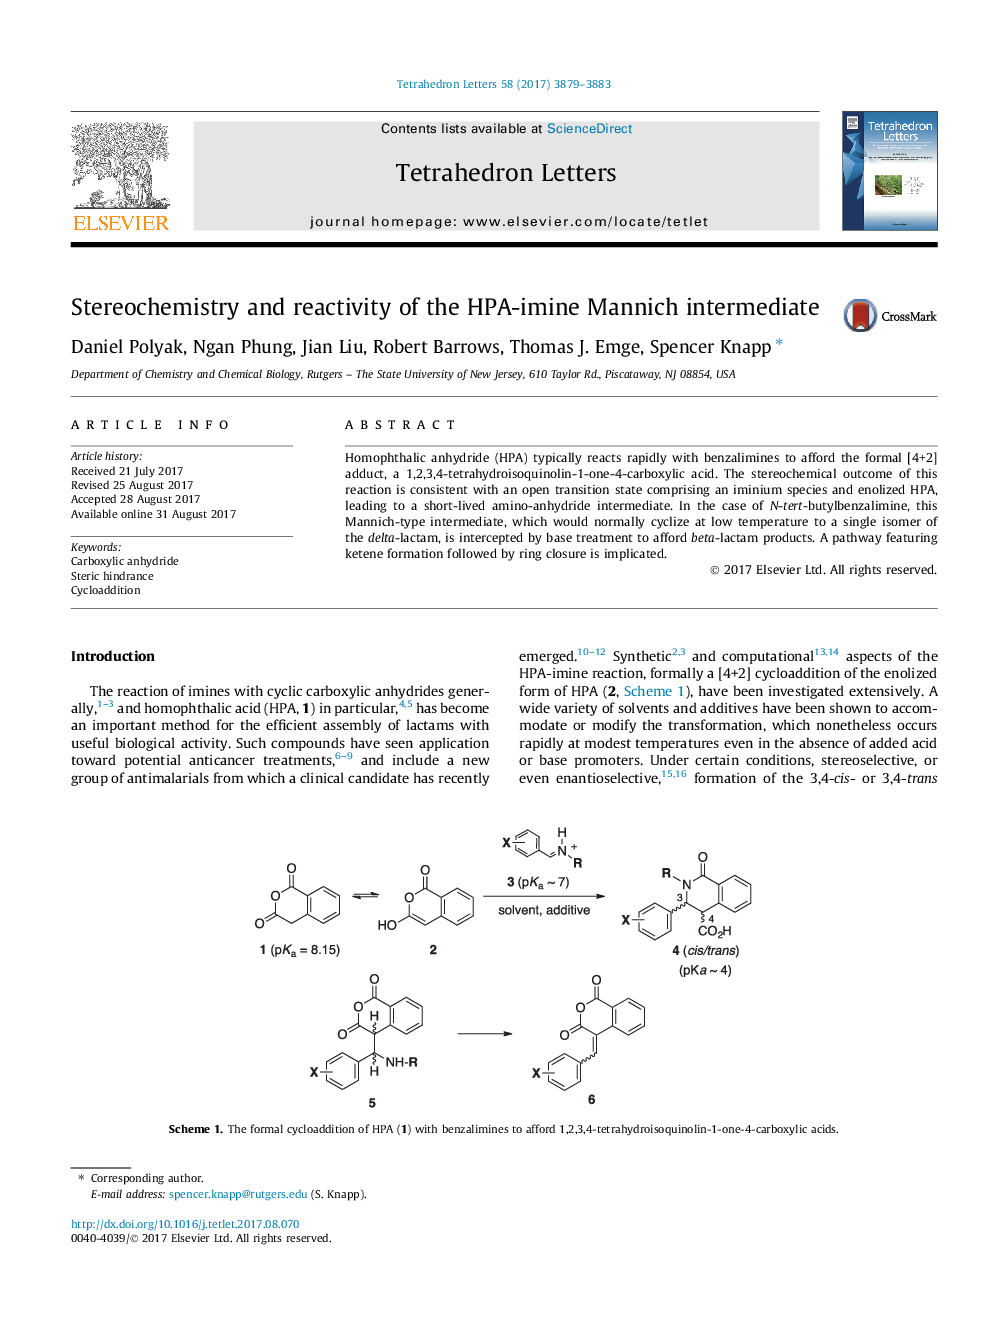 Stereochemistry and reactivity of the HPA-imine Mannich intermediate